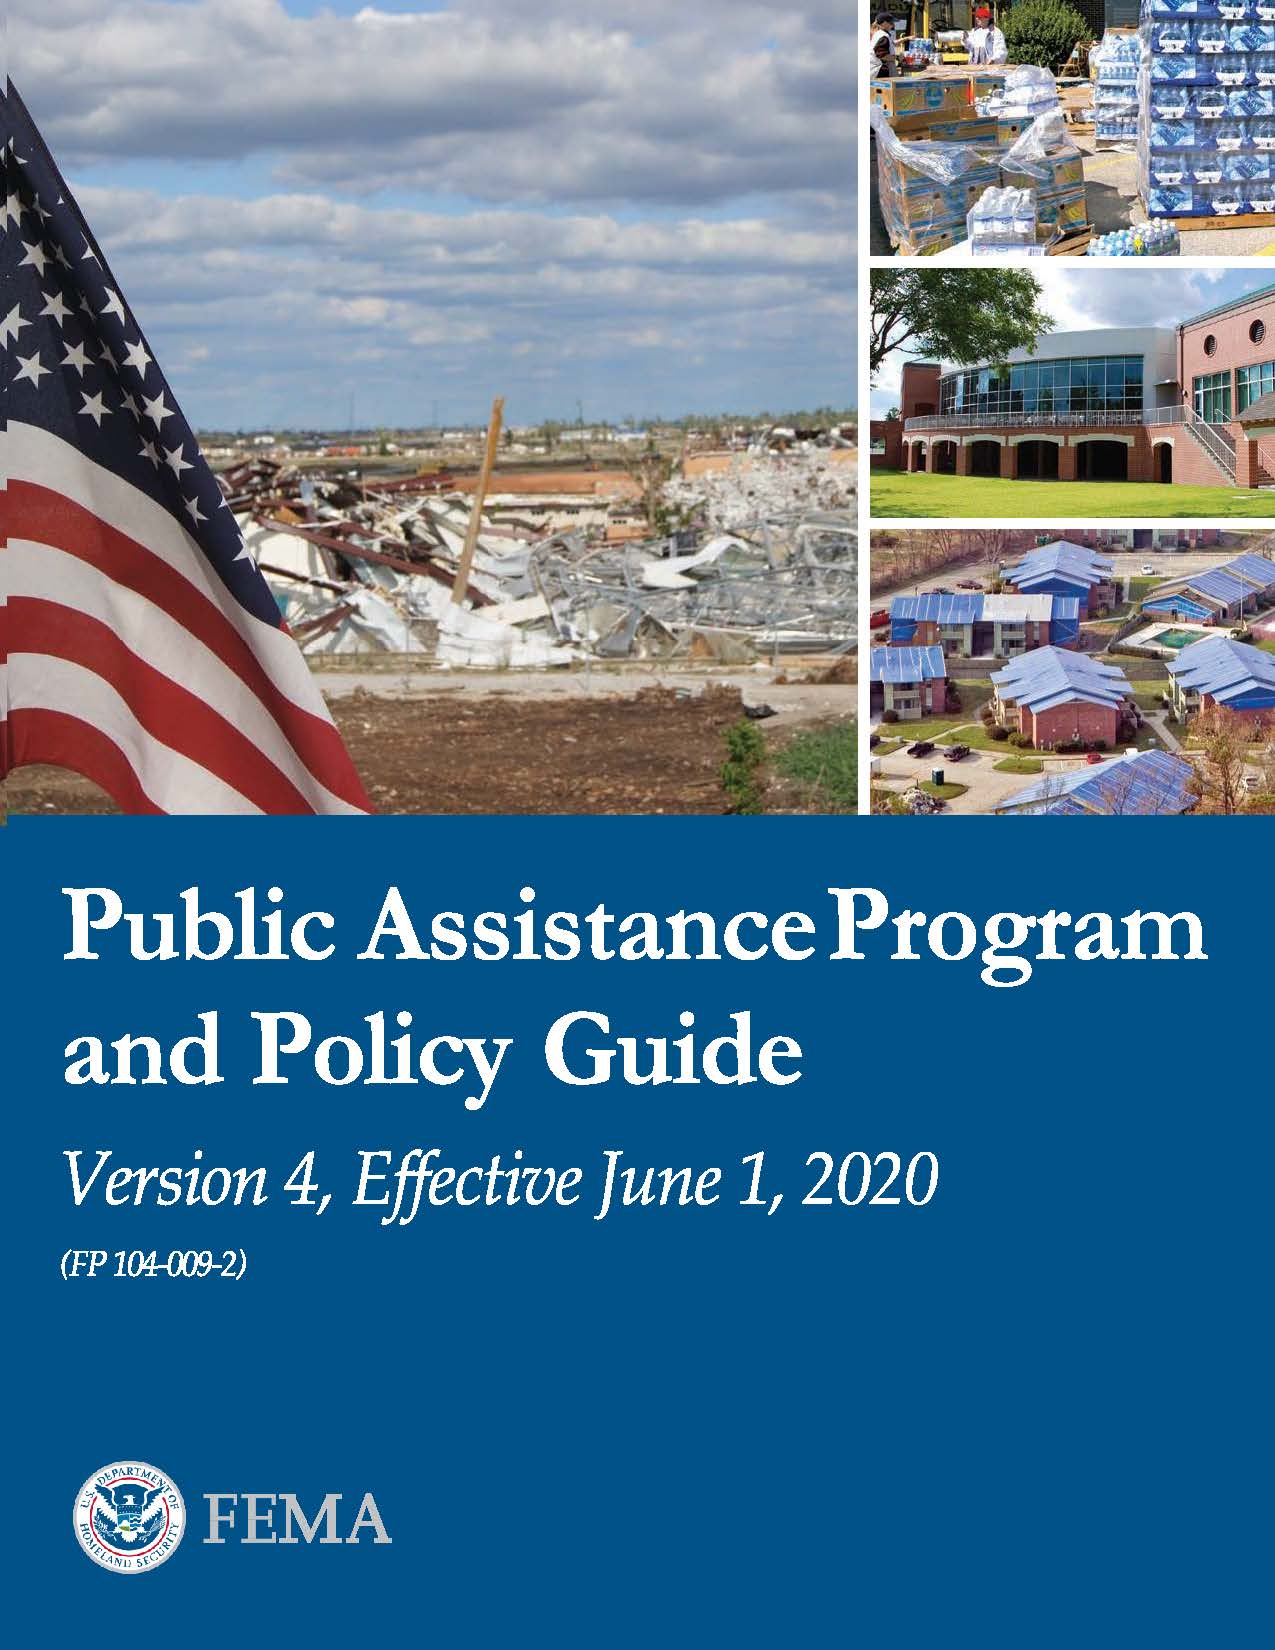 FEMA Public Assistance Program and Policy Guide.